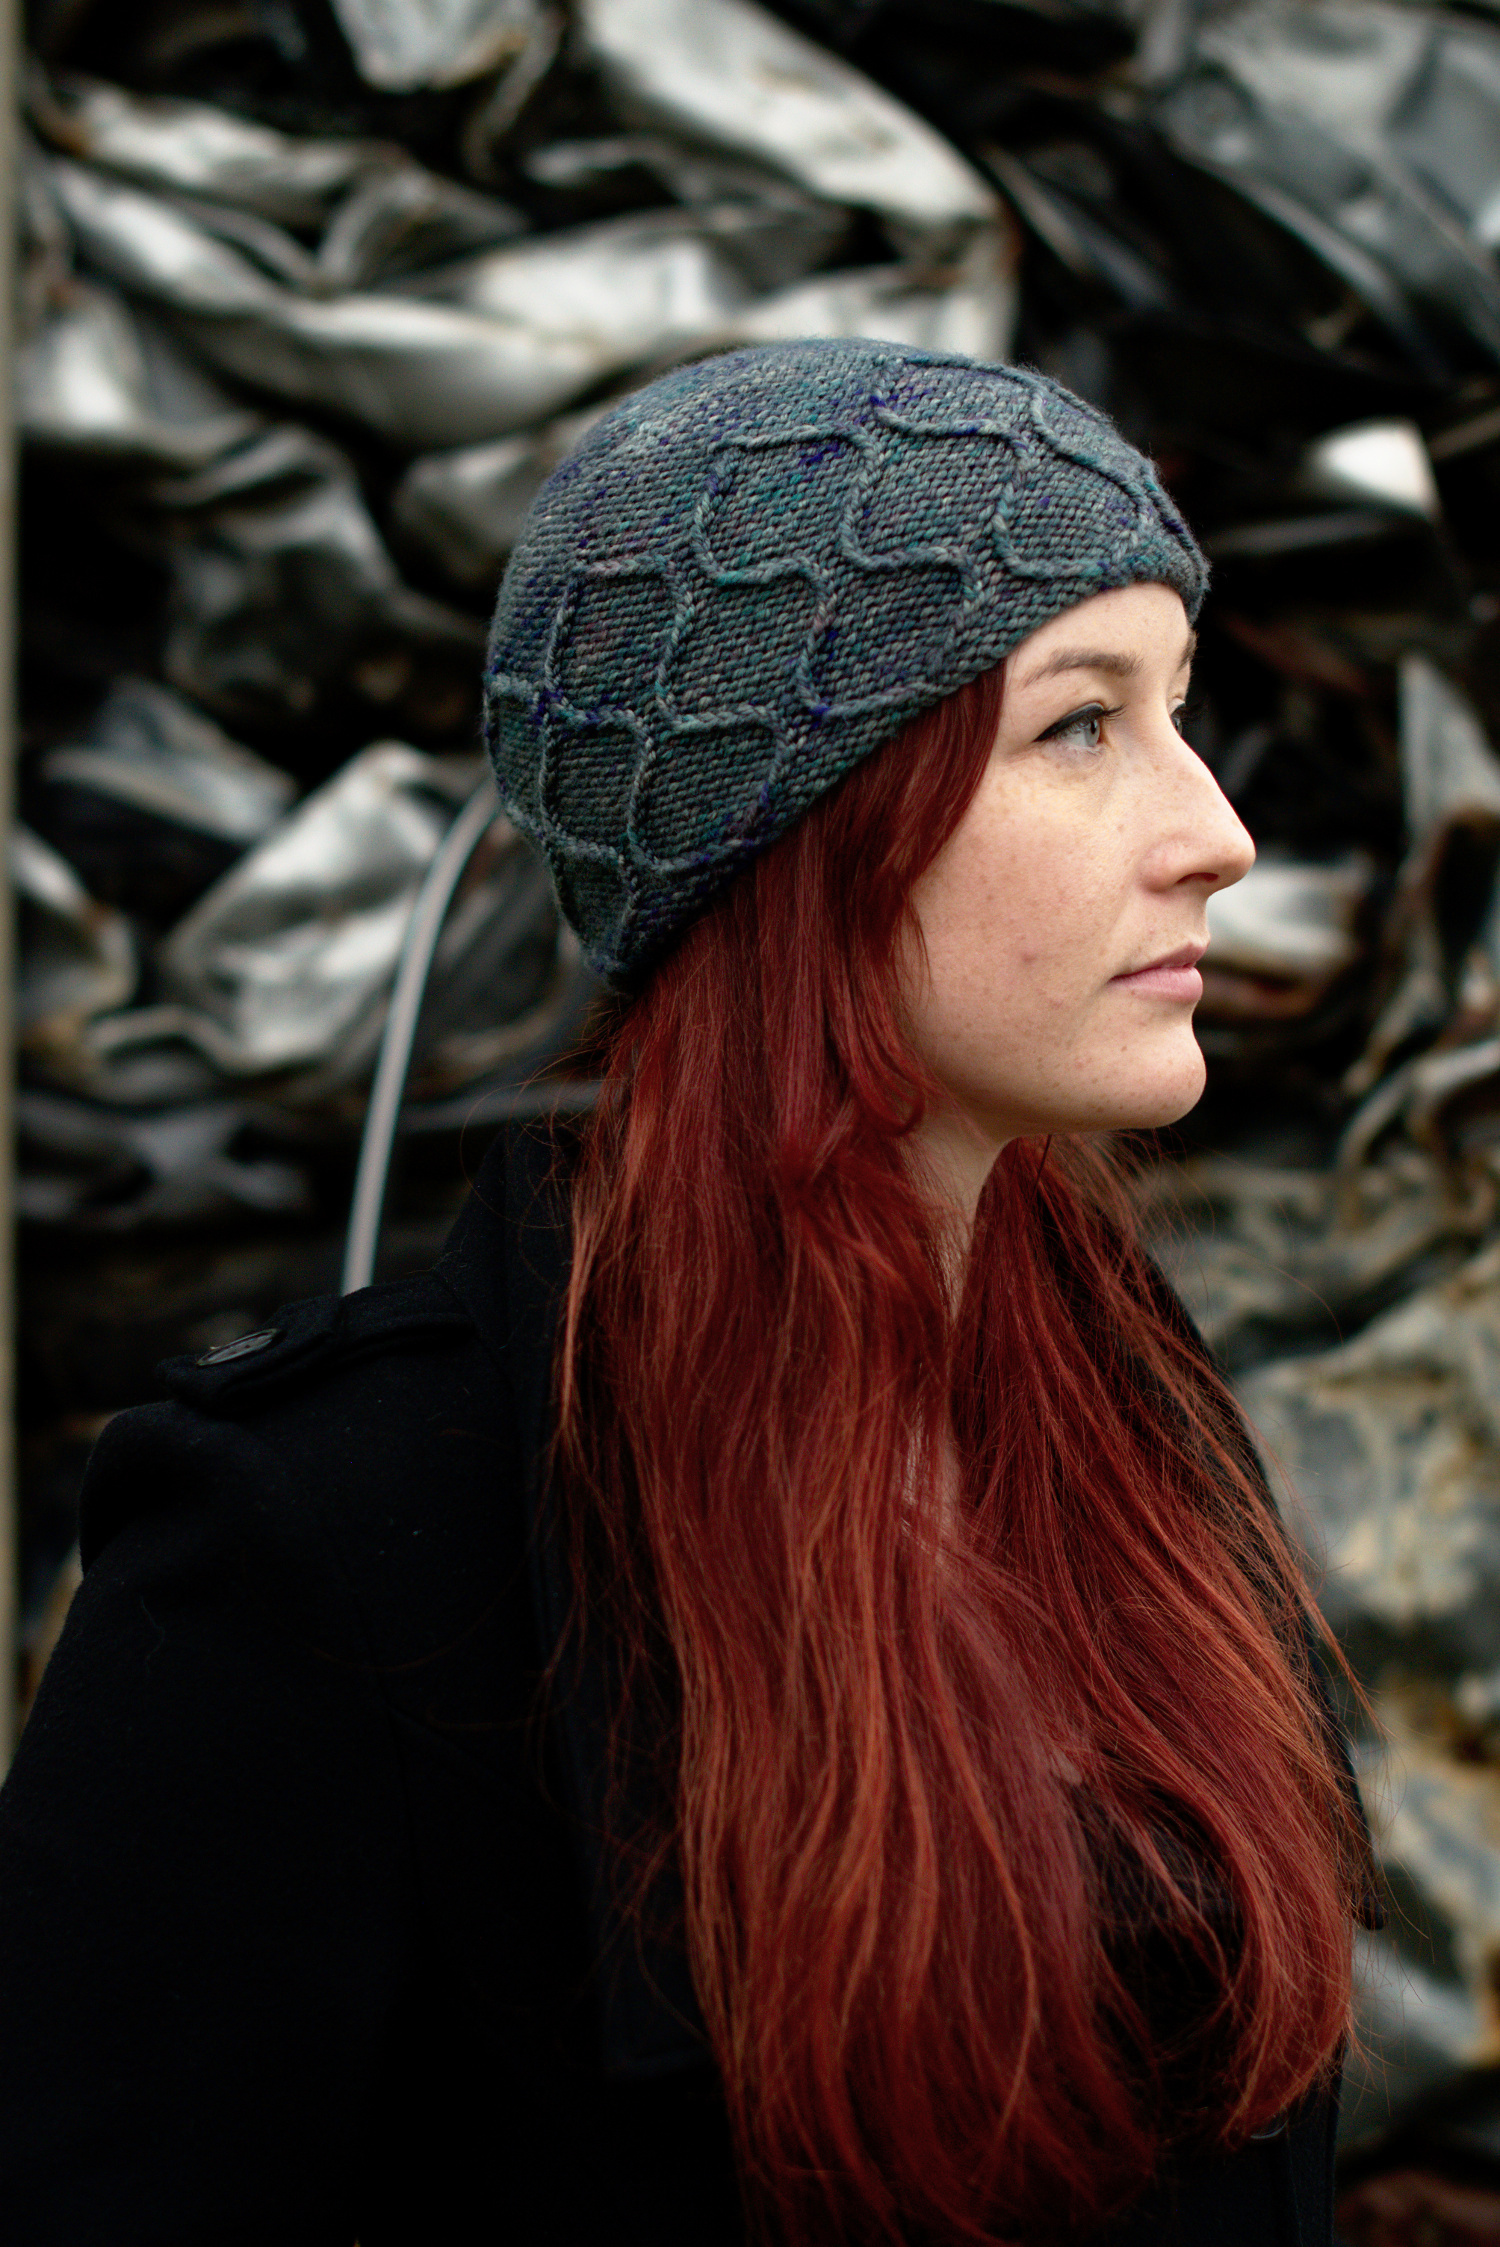 Filigree Beanie hand knitting pattern for an intricate Hat in worsted weight yarn